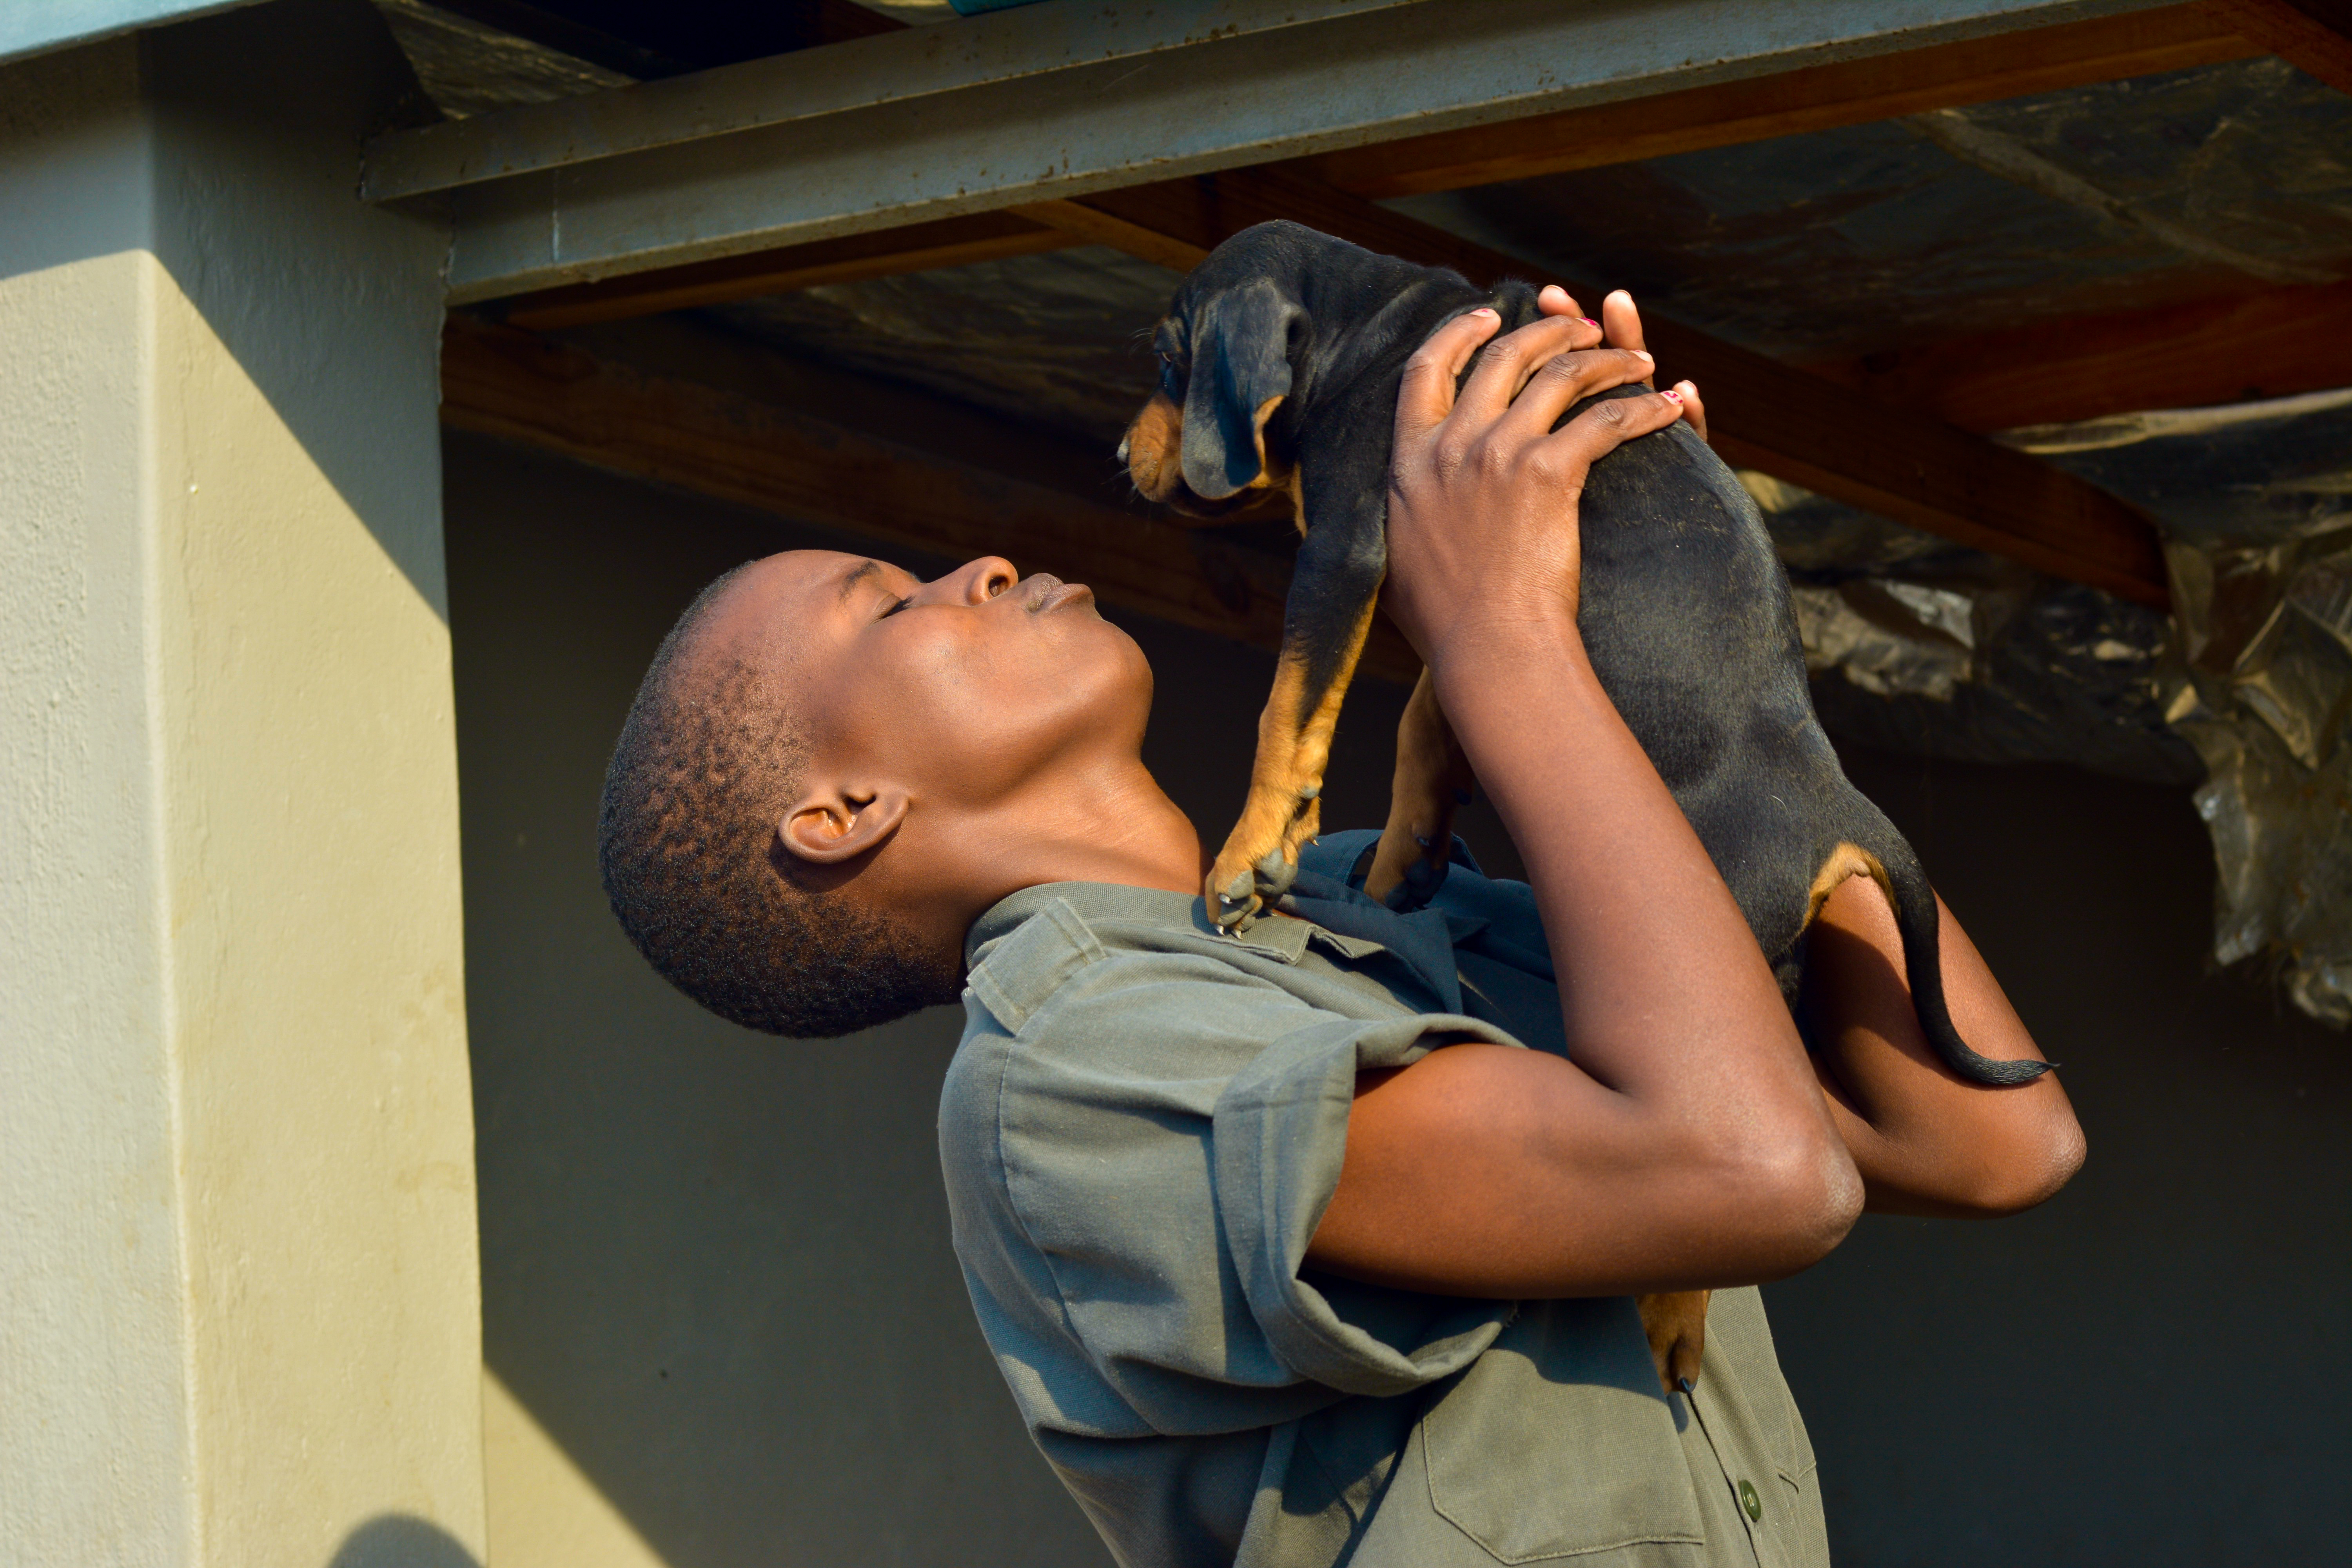 /Precious%2C%20an%20anti-poaching%20dog%20trainer%20holds%20up%20and%20kisses%20a%20new%20puppy%20from%20their%20team.